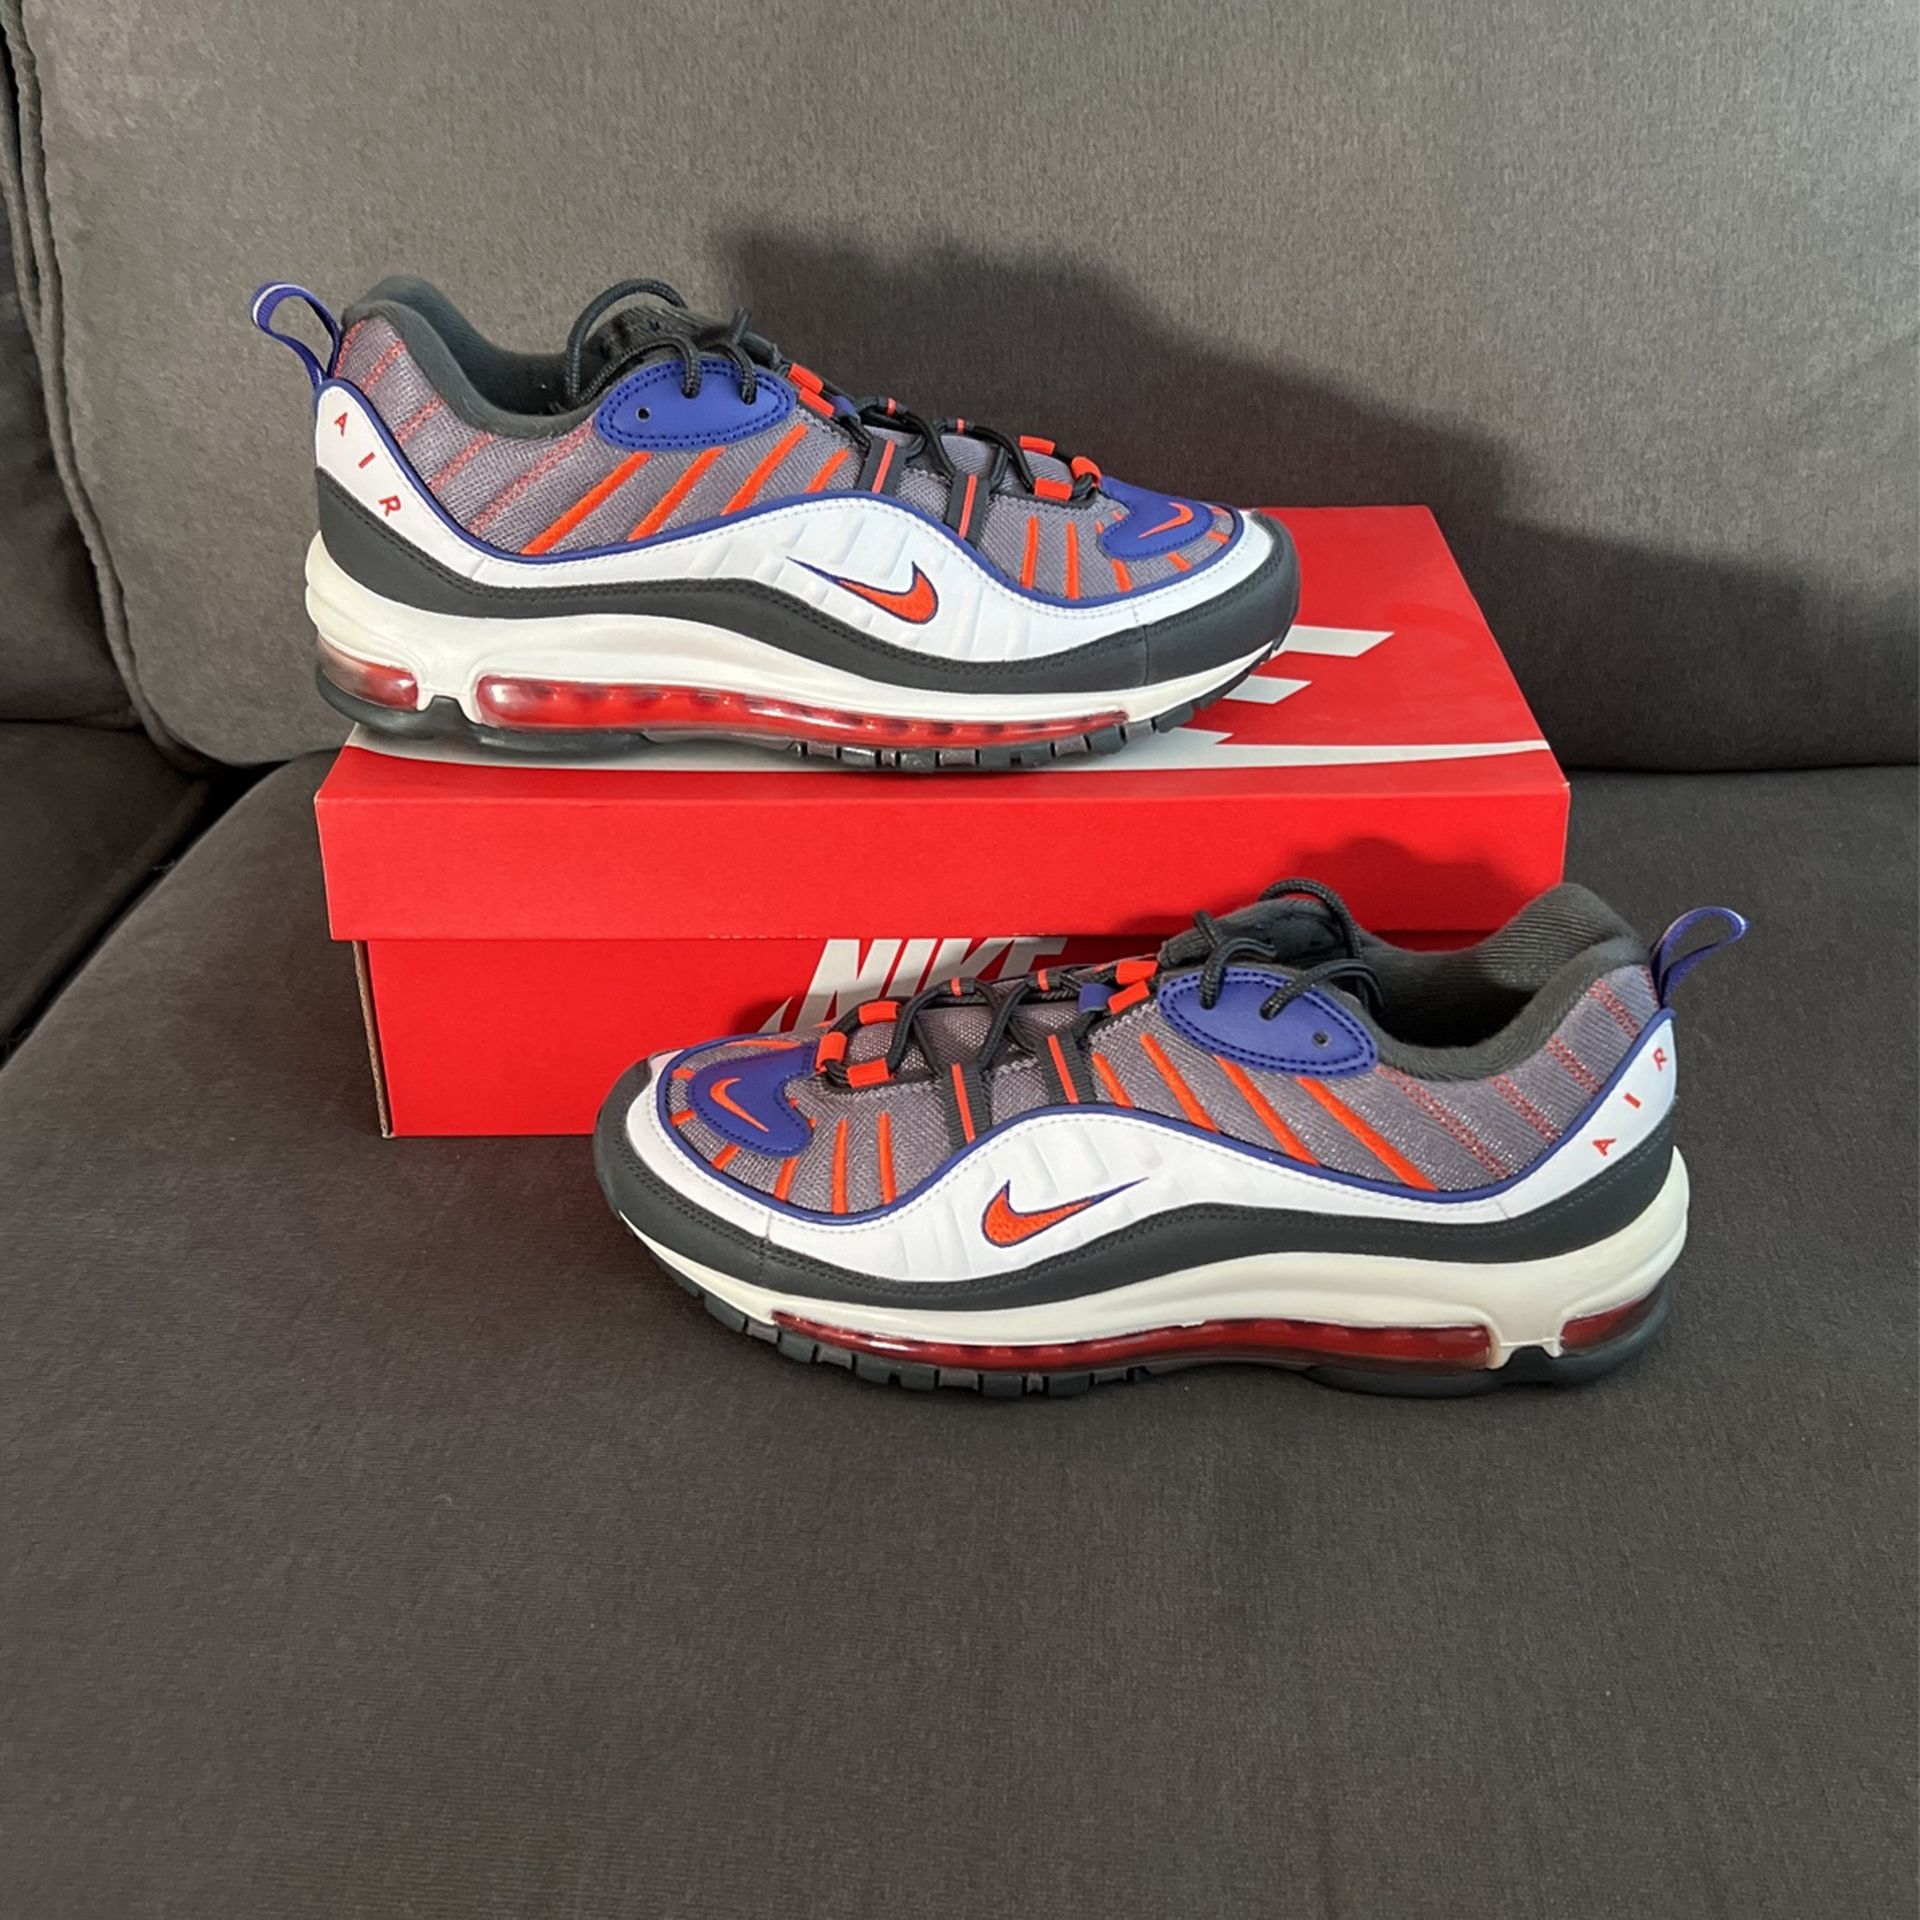 Air Max 98 Shoes Sz 8.5 95 97 New In Box for Sale in Hacienda Heights, CA - OfferUp